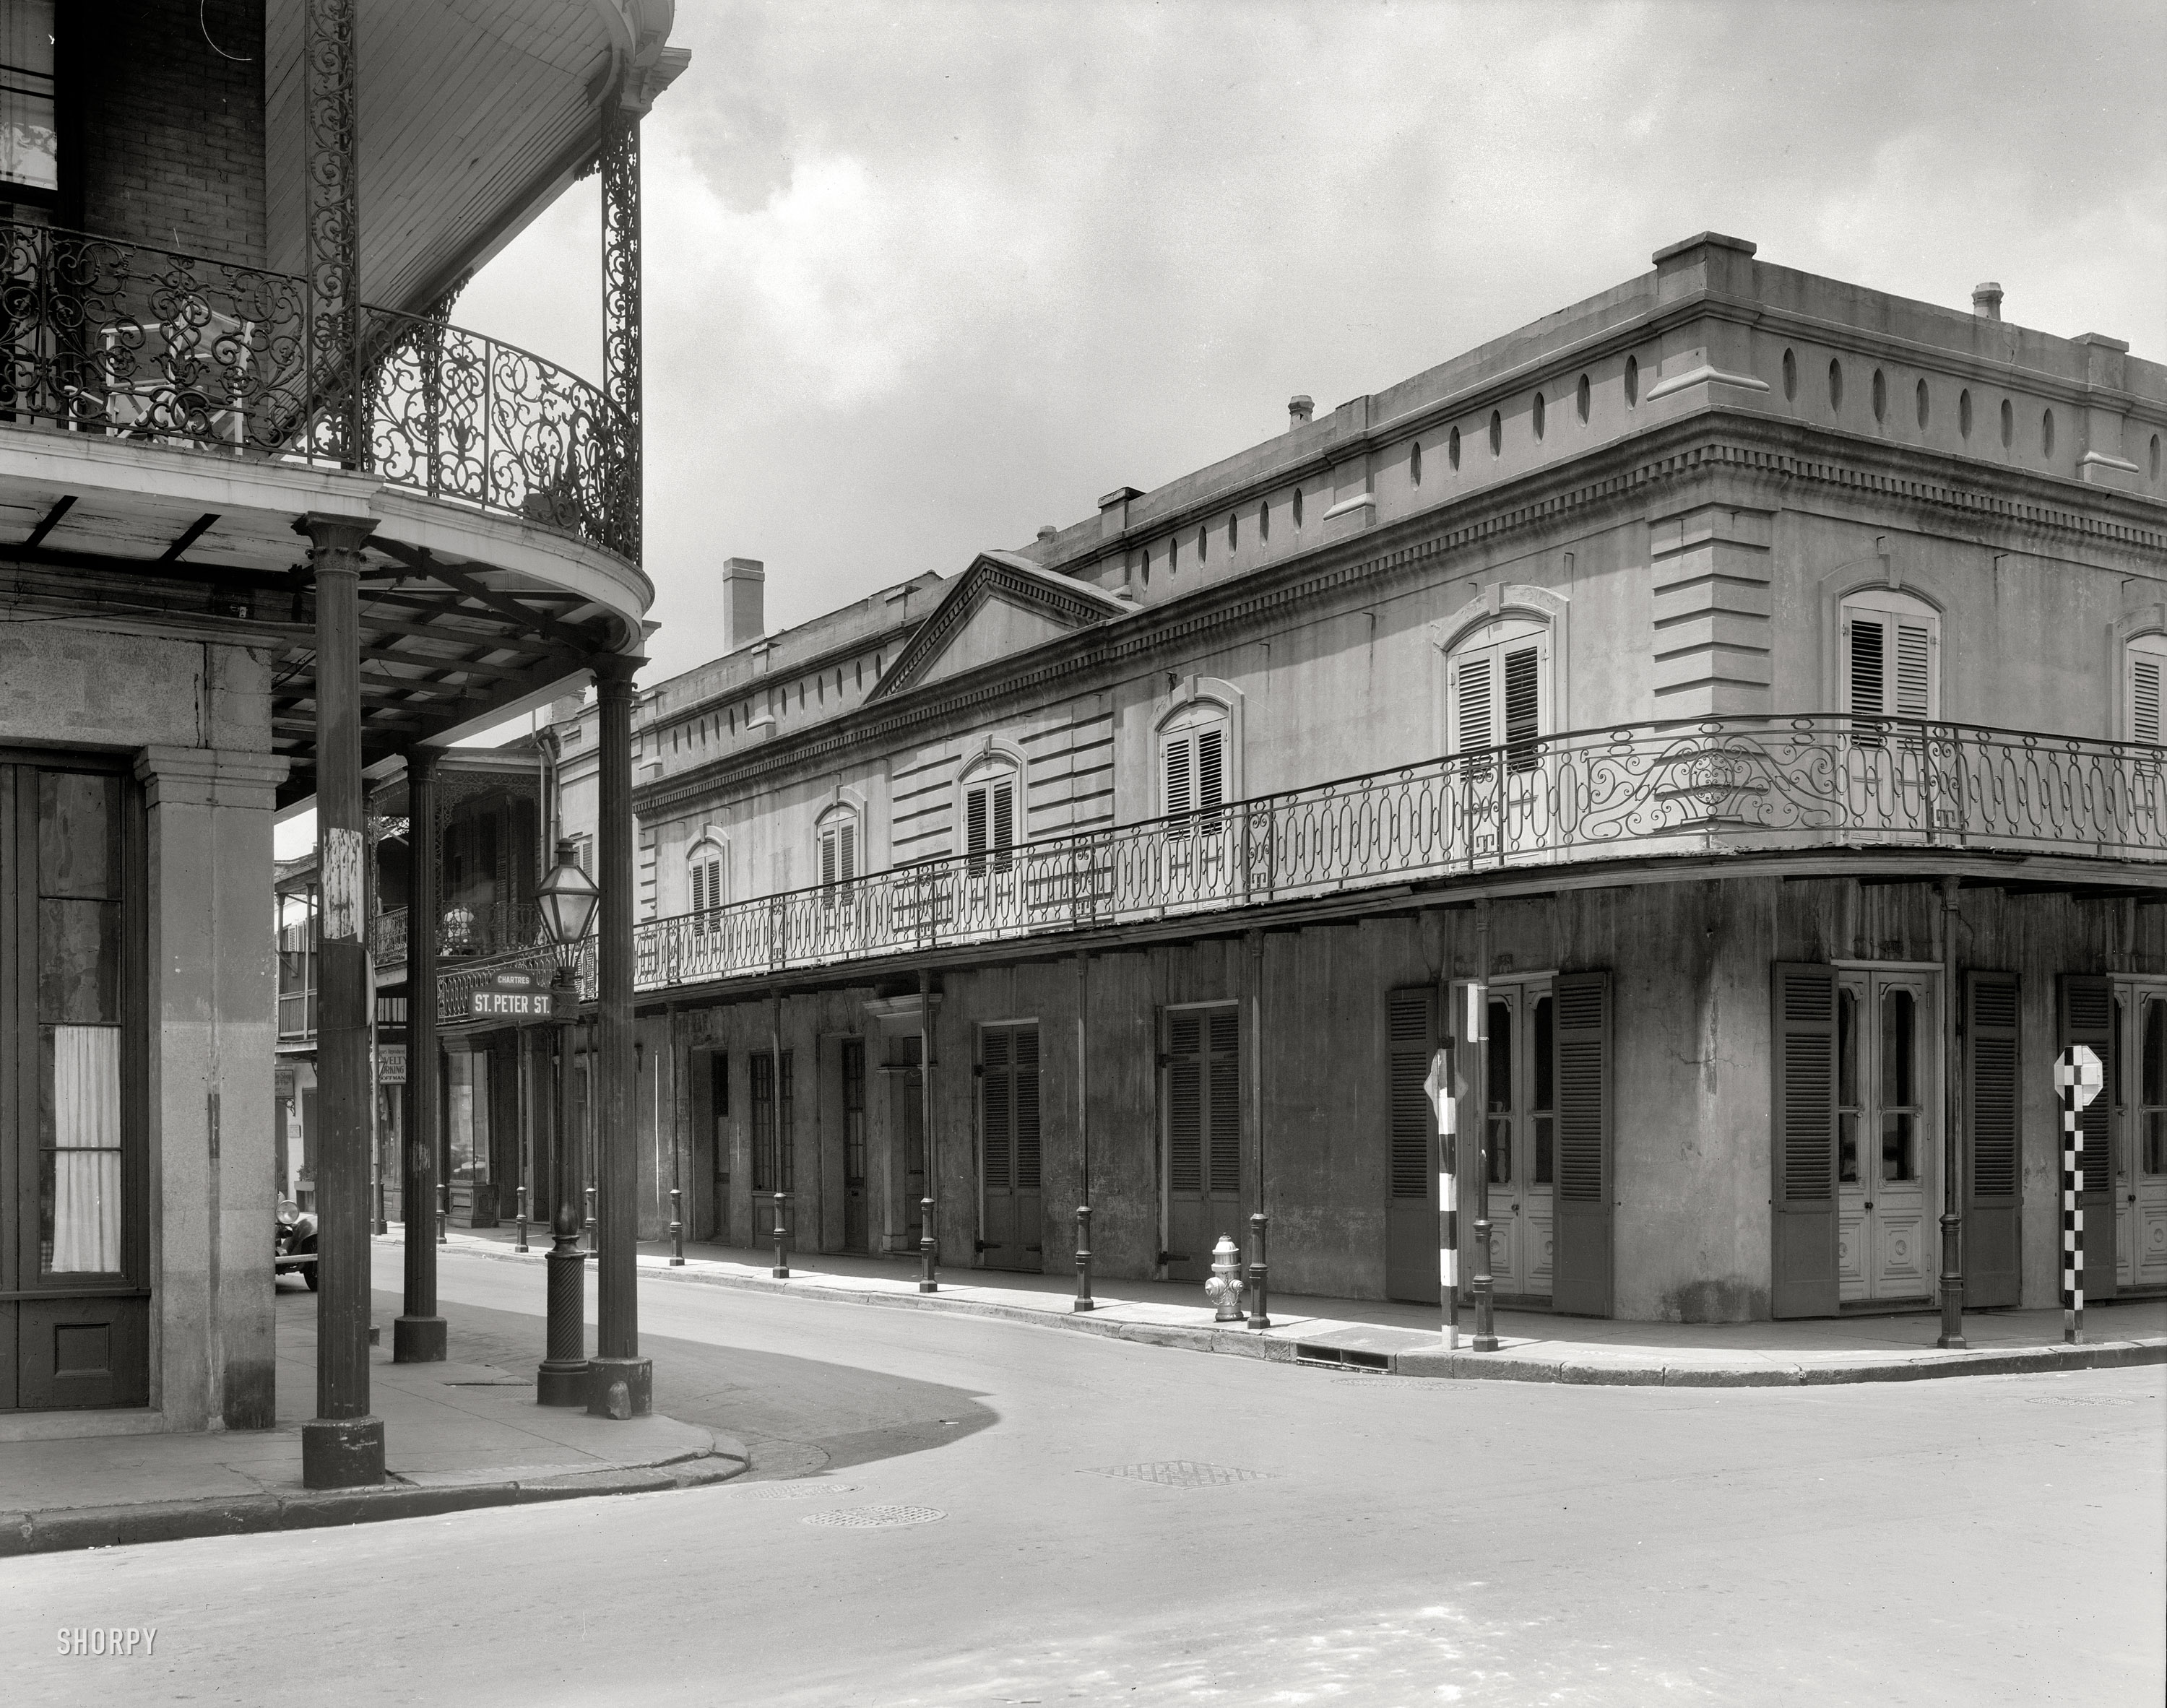 New Orleans circa 1937. "Le Petit Theatre du Vieux Carre, Chartres and St. Peter streets." 8x10 acetate negative by Frances Benjamin Johnston. View full size.